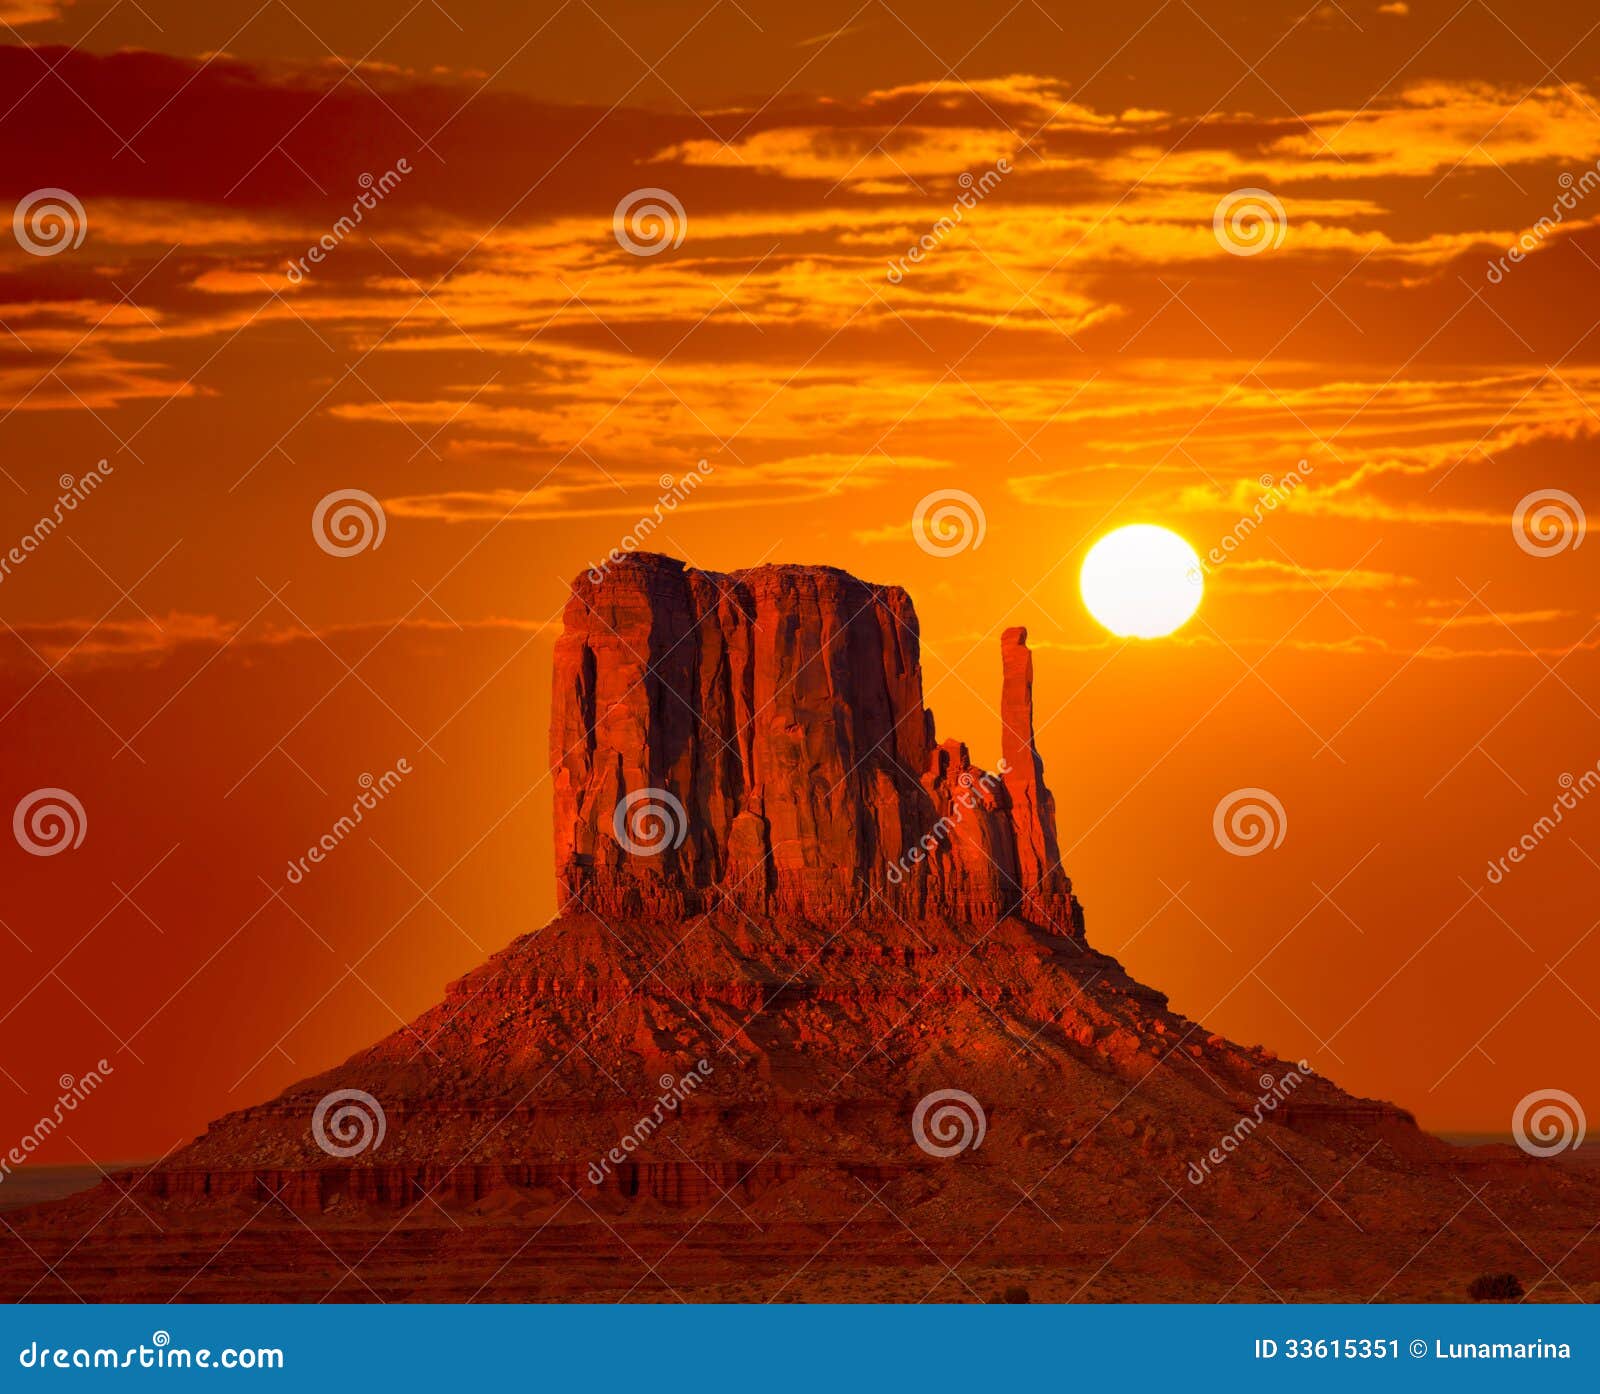 monument valley west mitten at sunrise sky